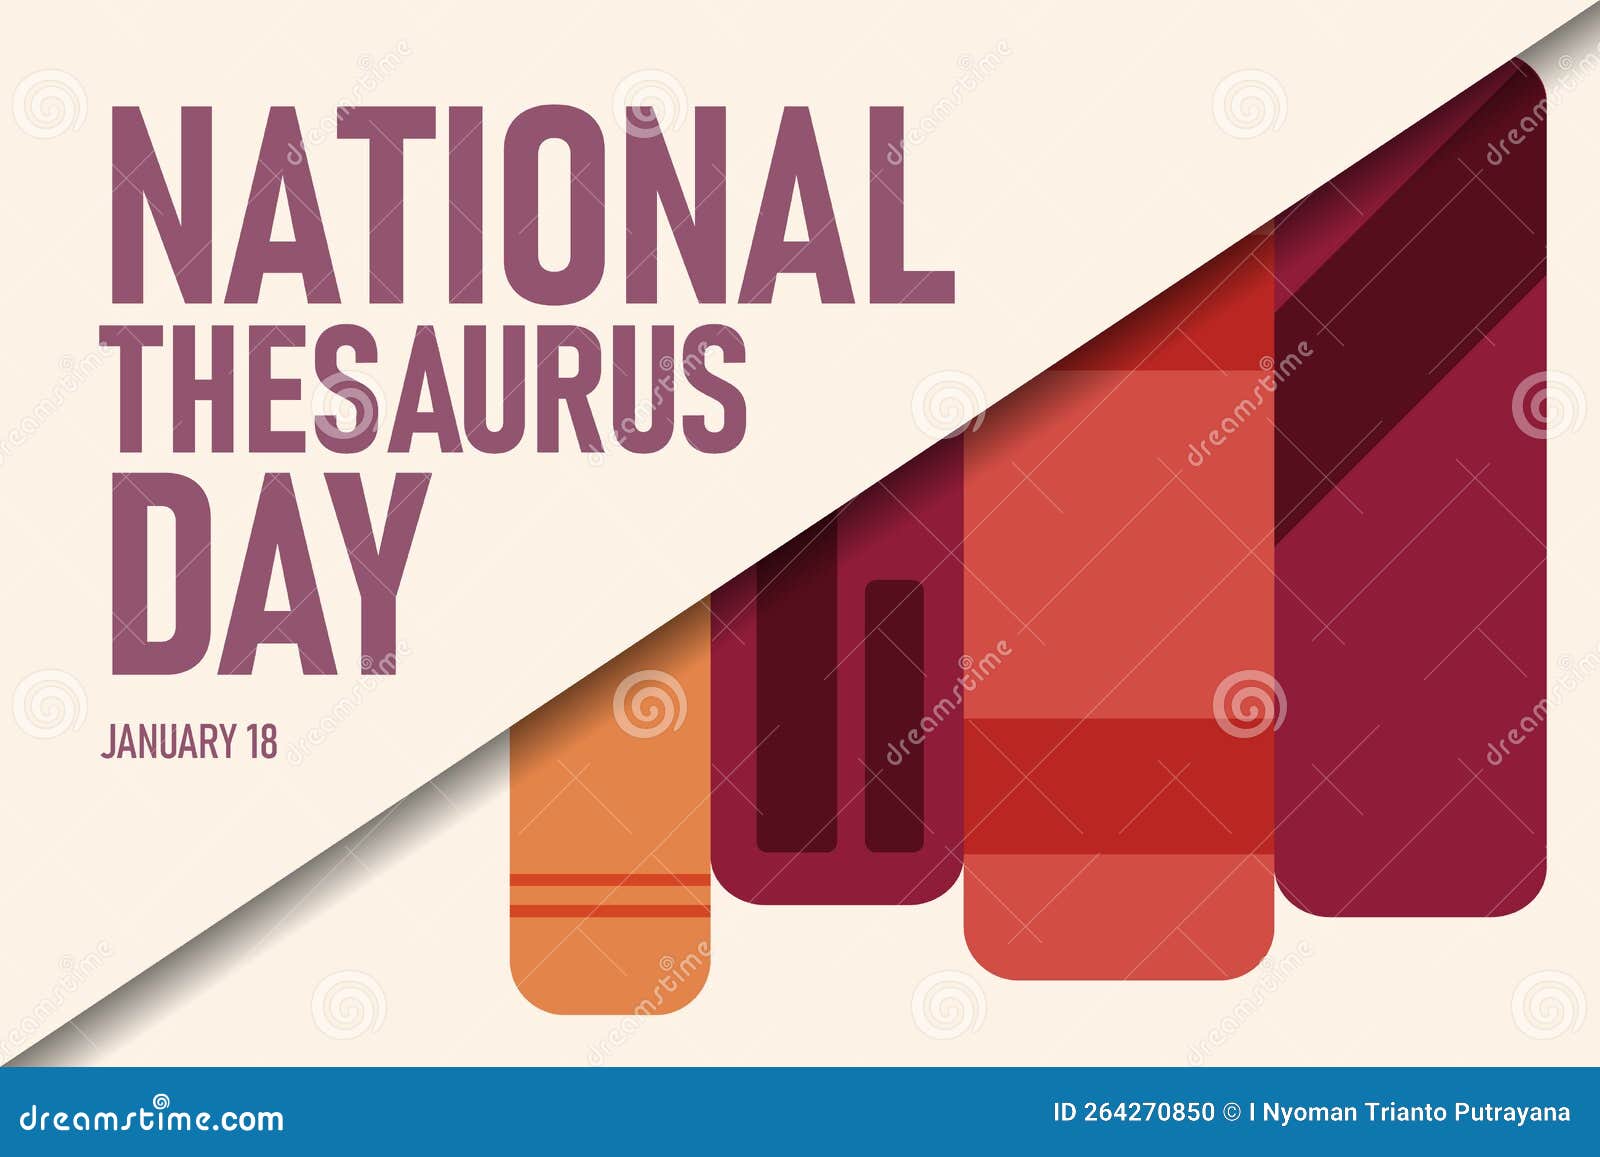 national thesaurus day background